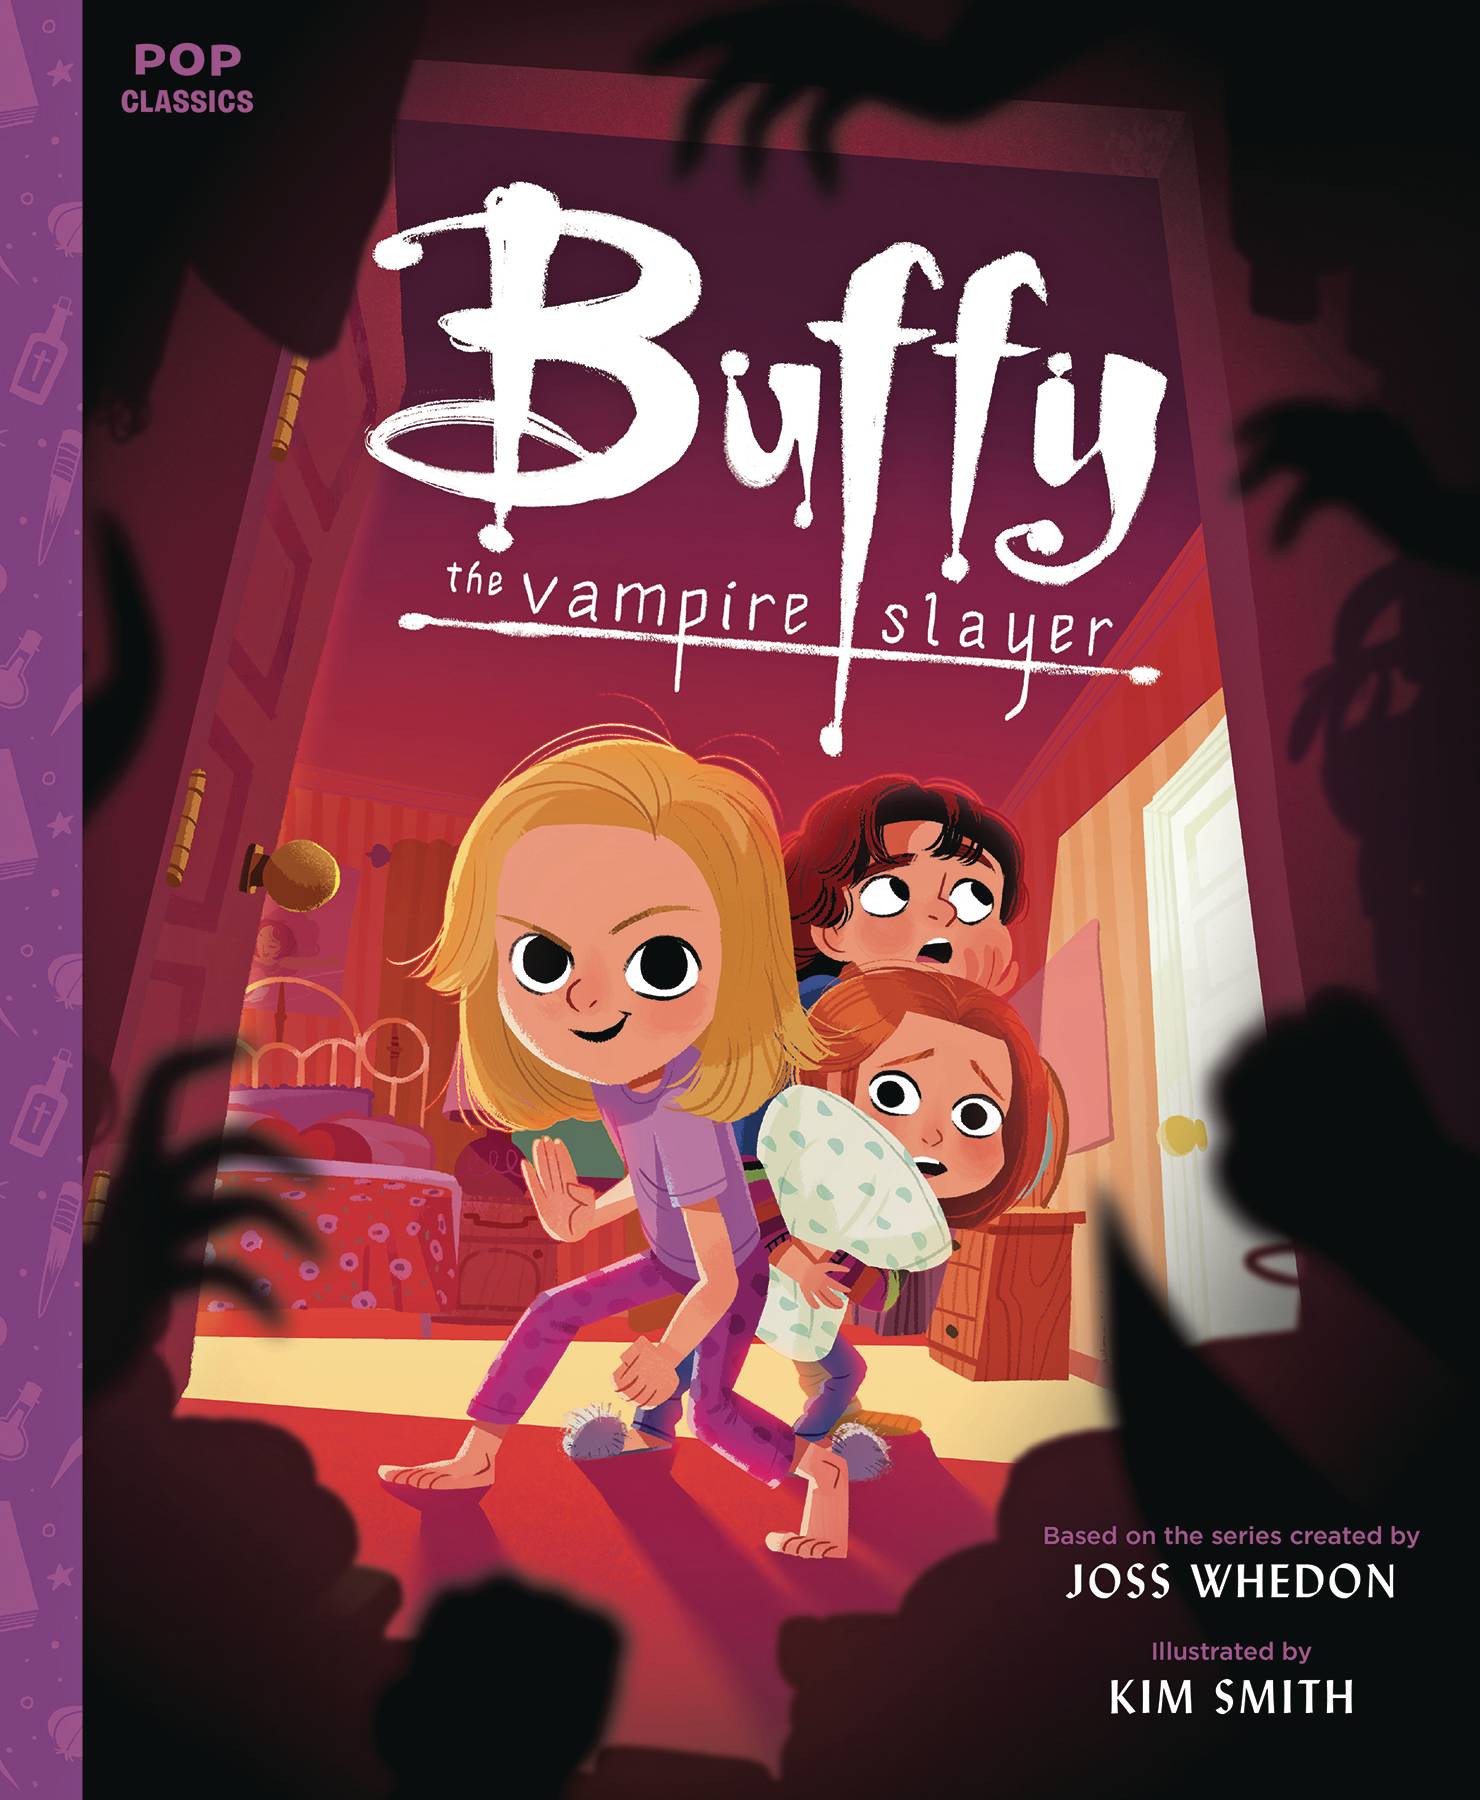 Buffy the Vampire Slayer Pop Classic Illustrated Storybook Hardcover